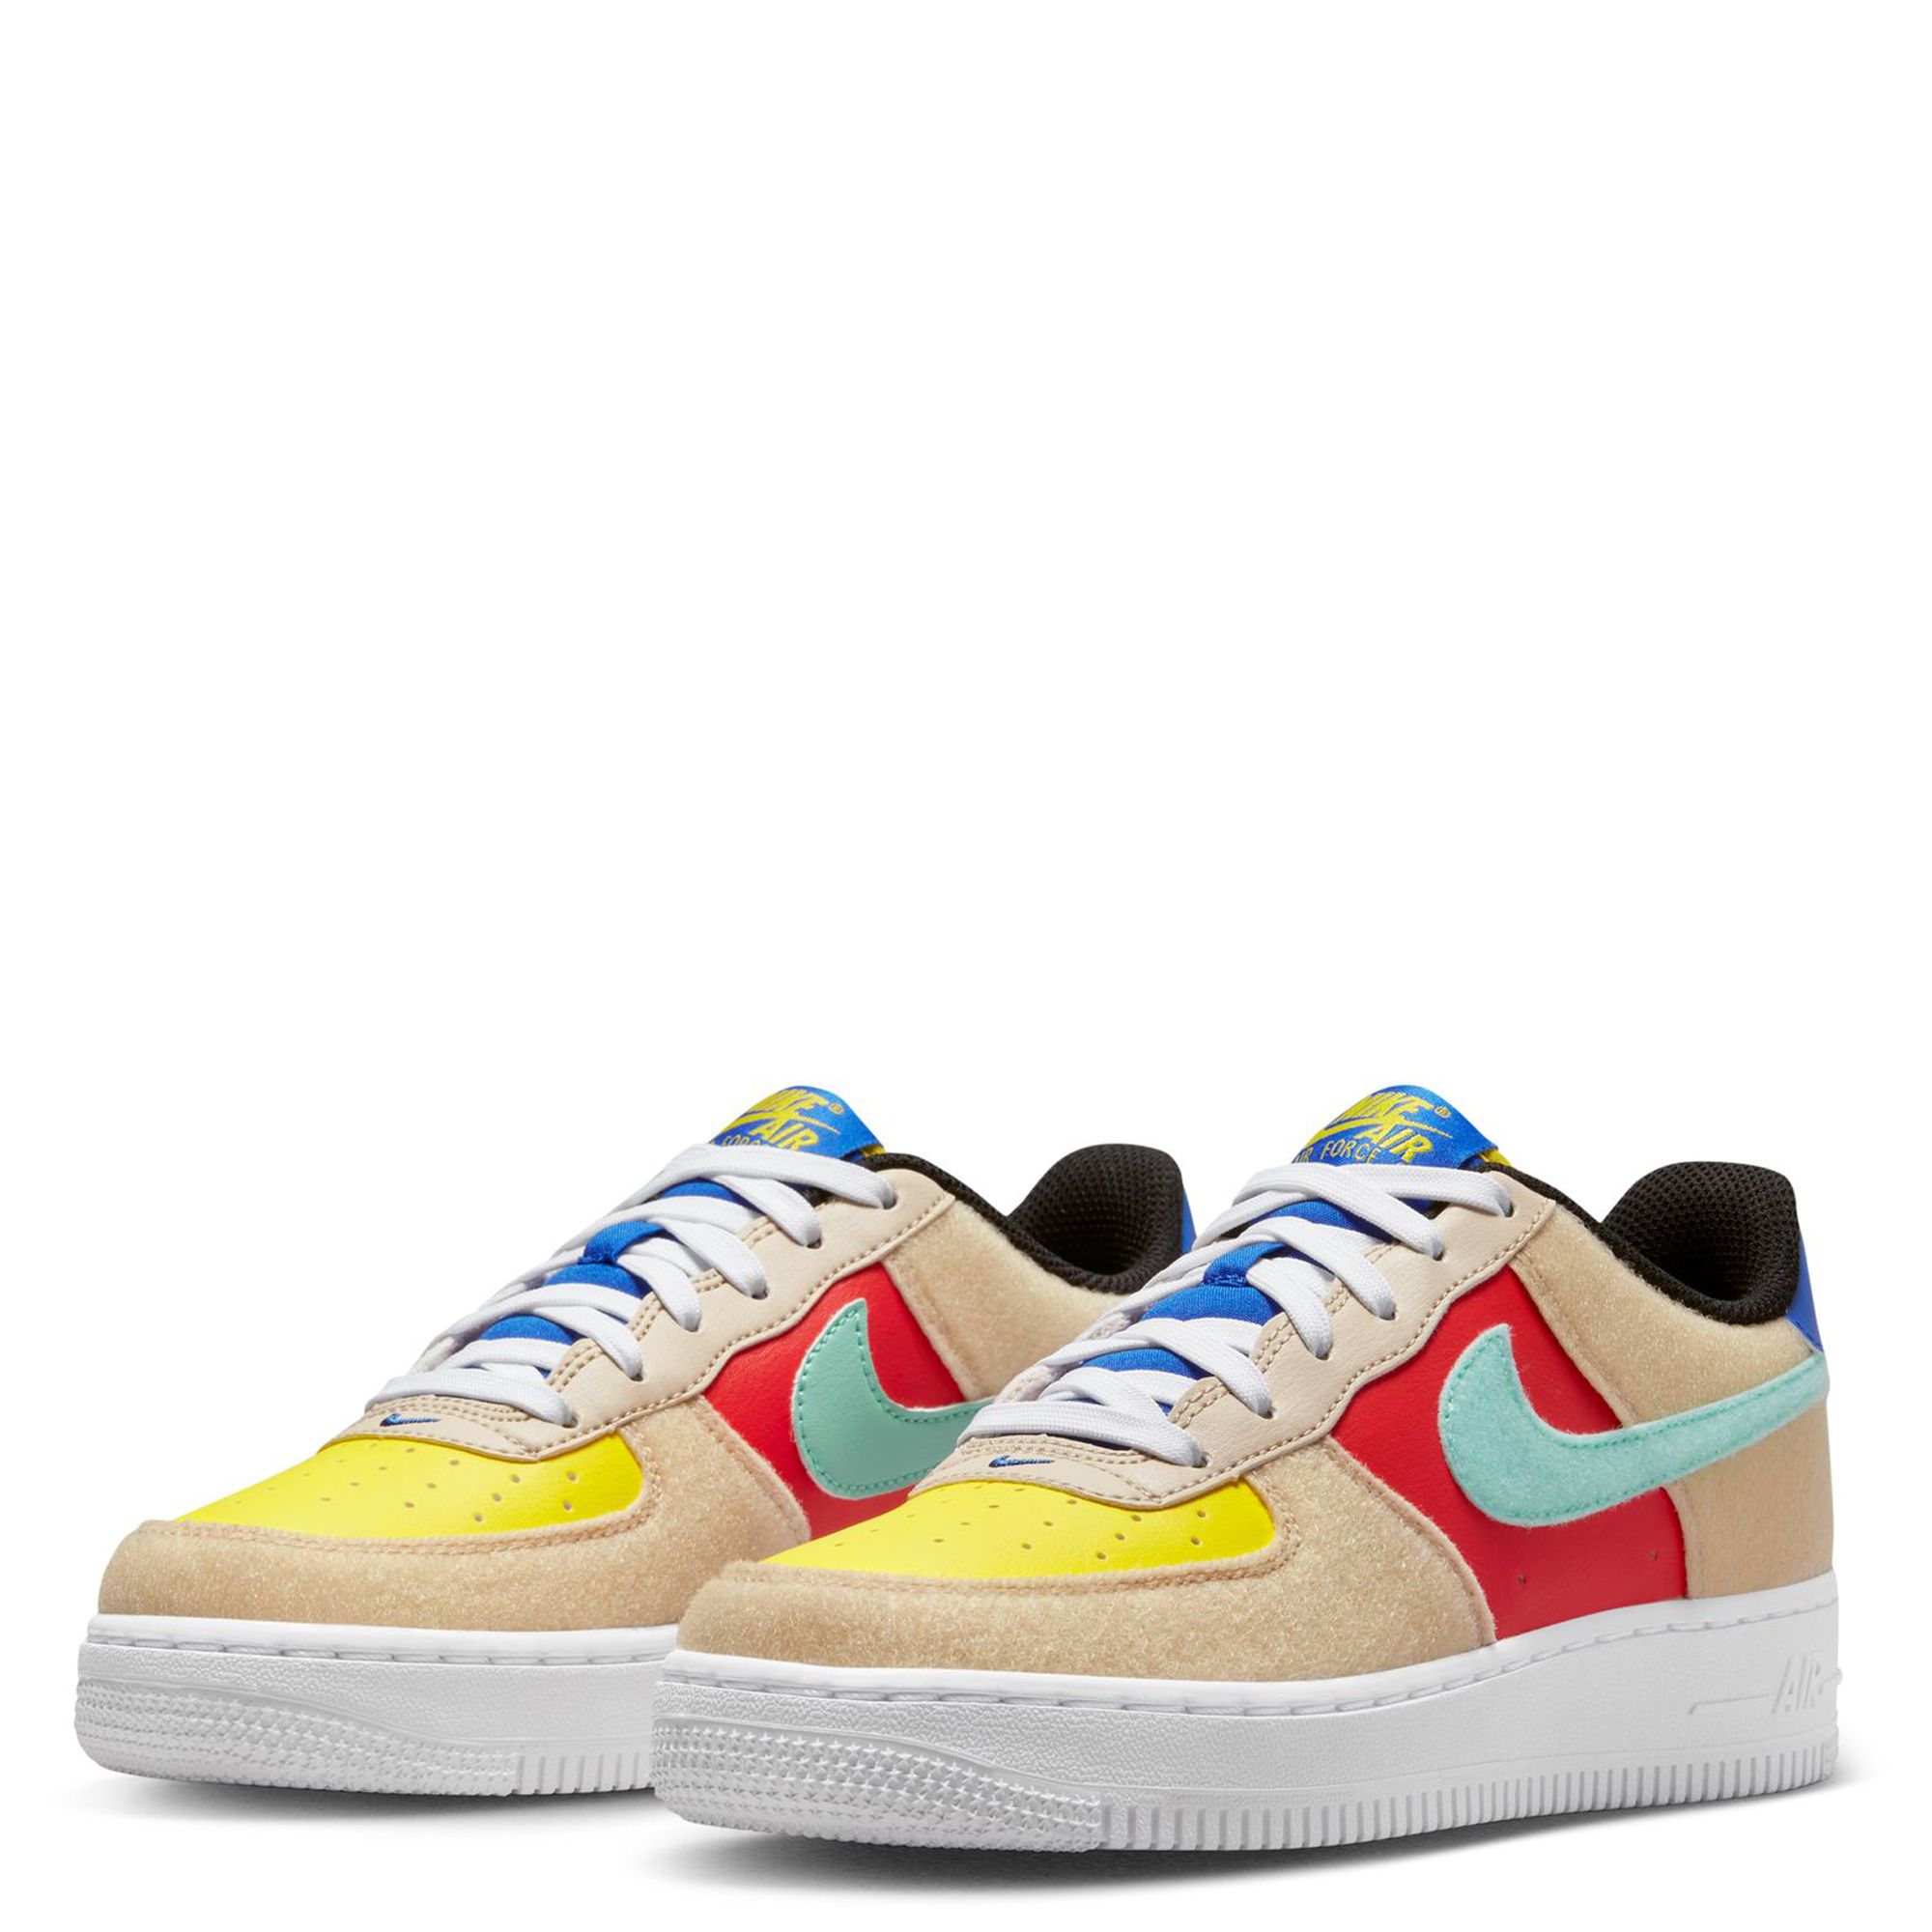 Nike Air Force 1 Low 82 Double Swoosh White Medium Blue (GS), 4.5 / 6W / New